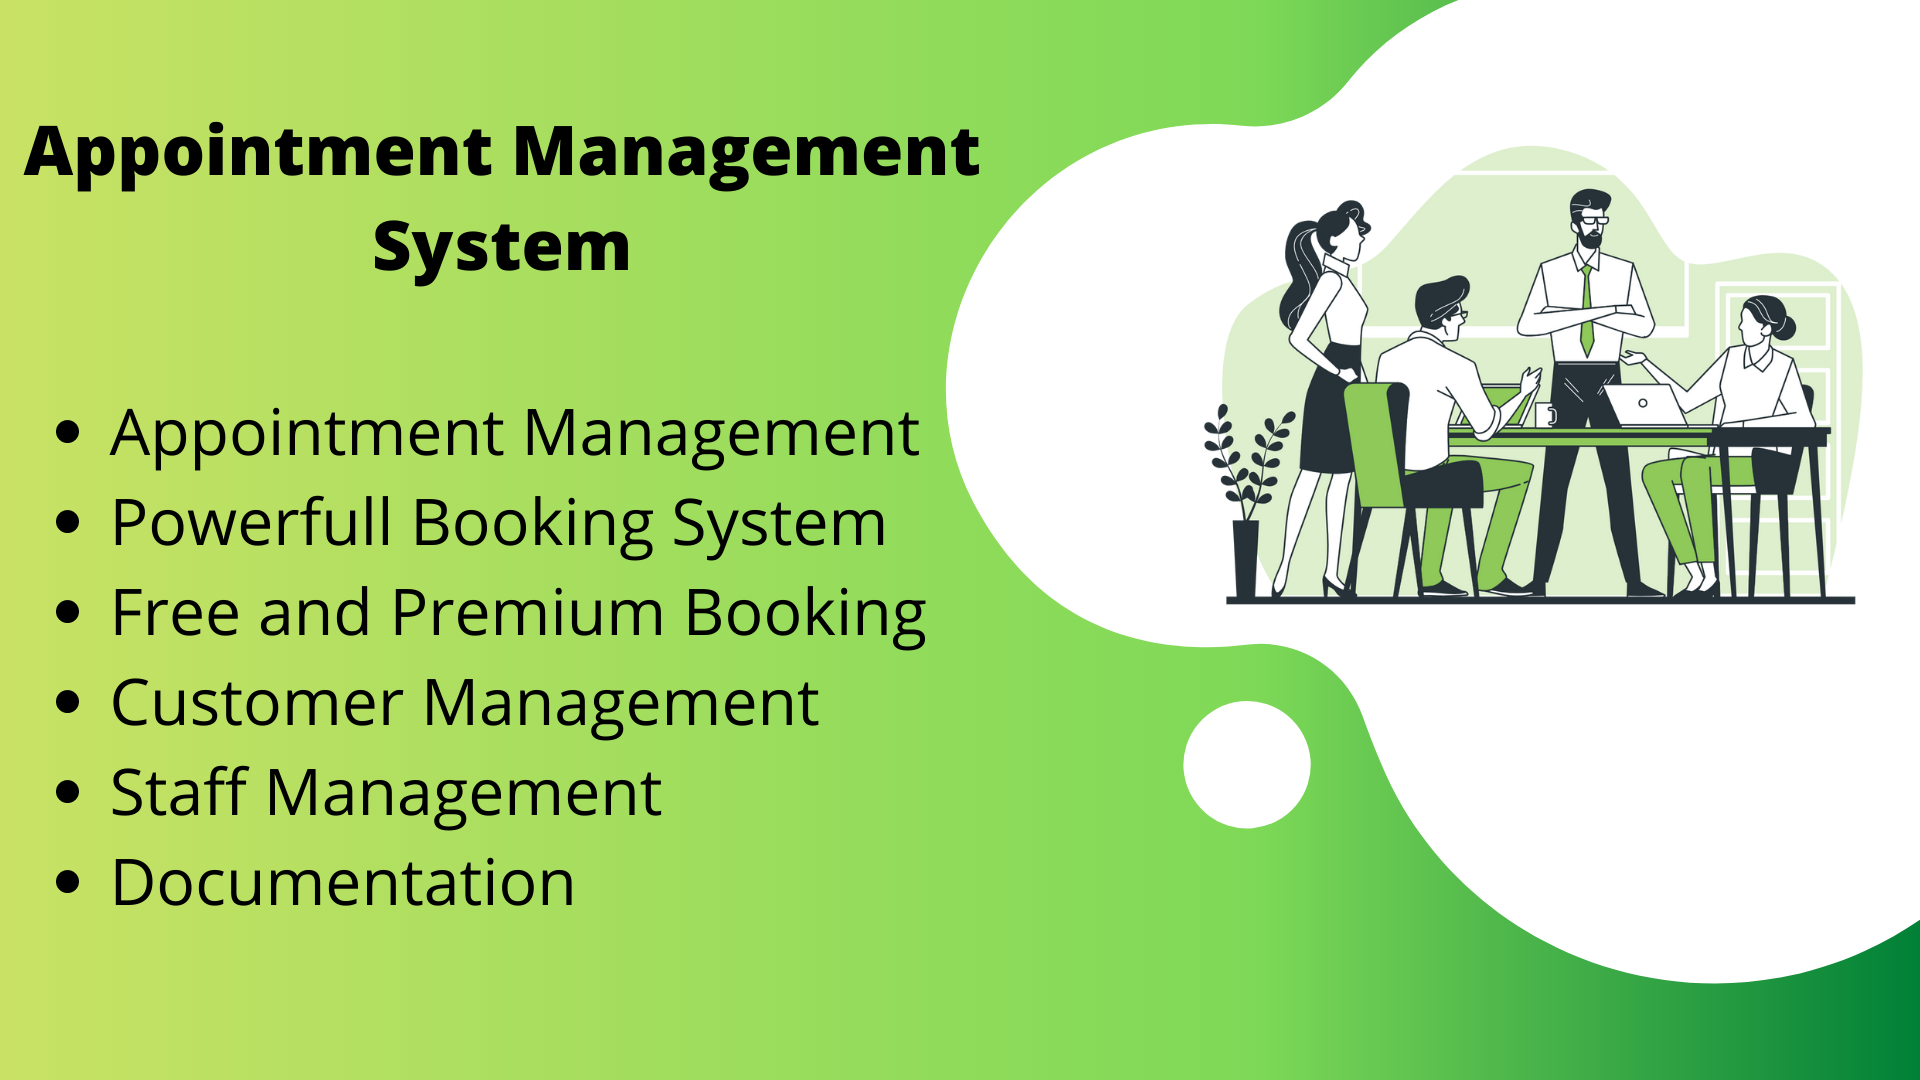 Appointment Management System (2)